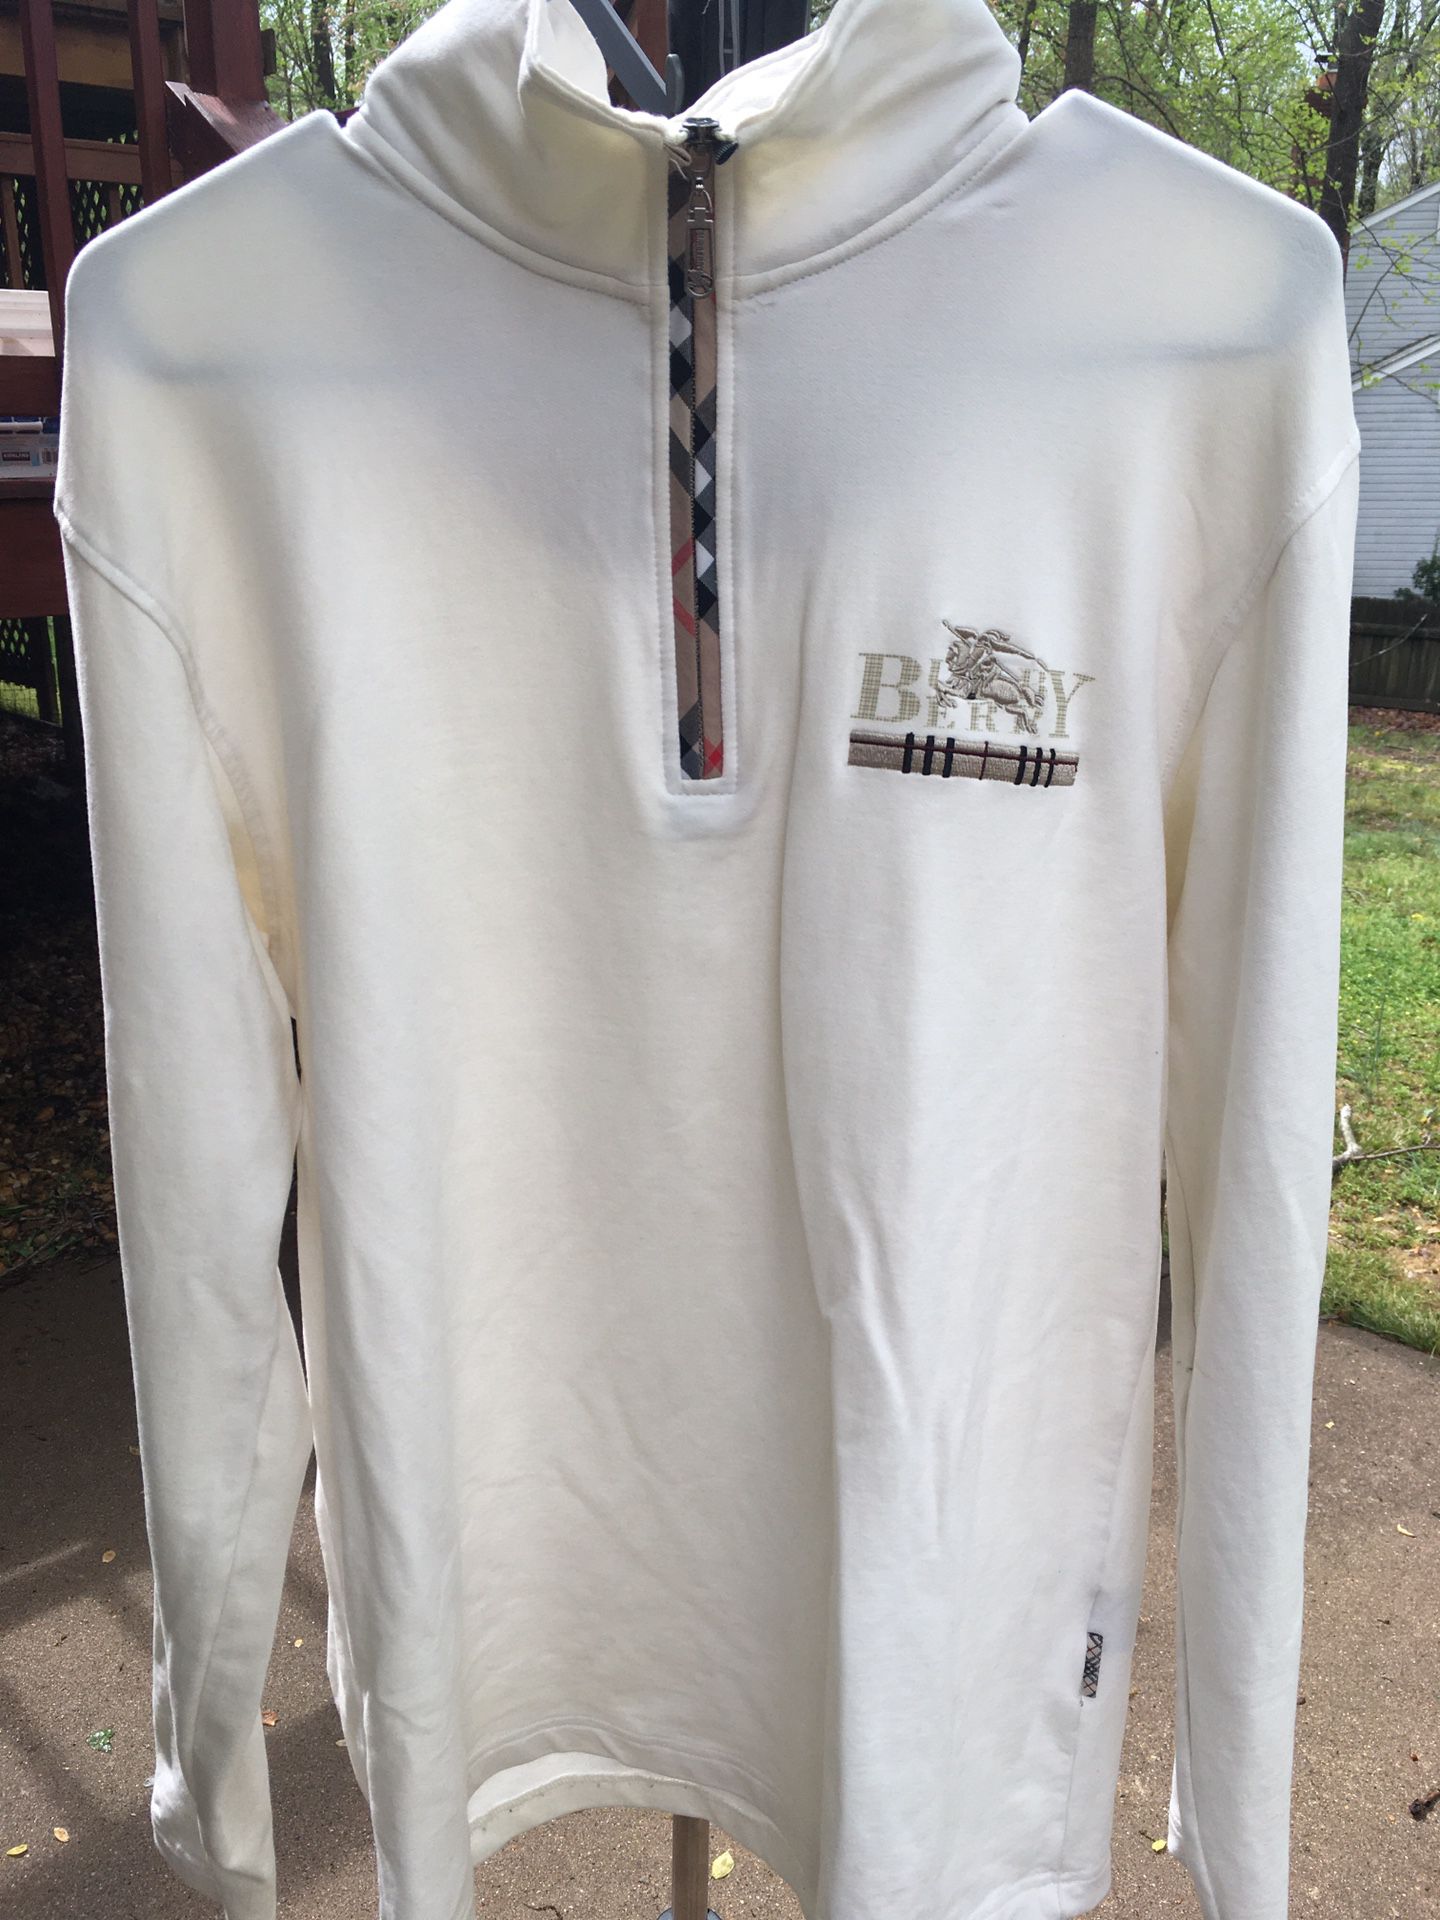 Burberry pullover long sleeve